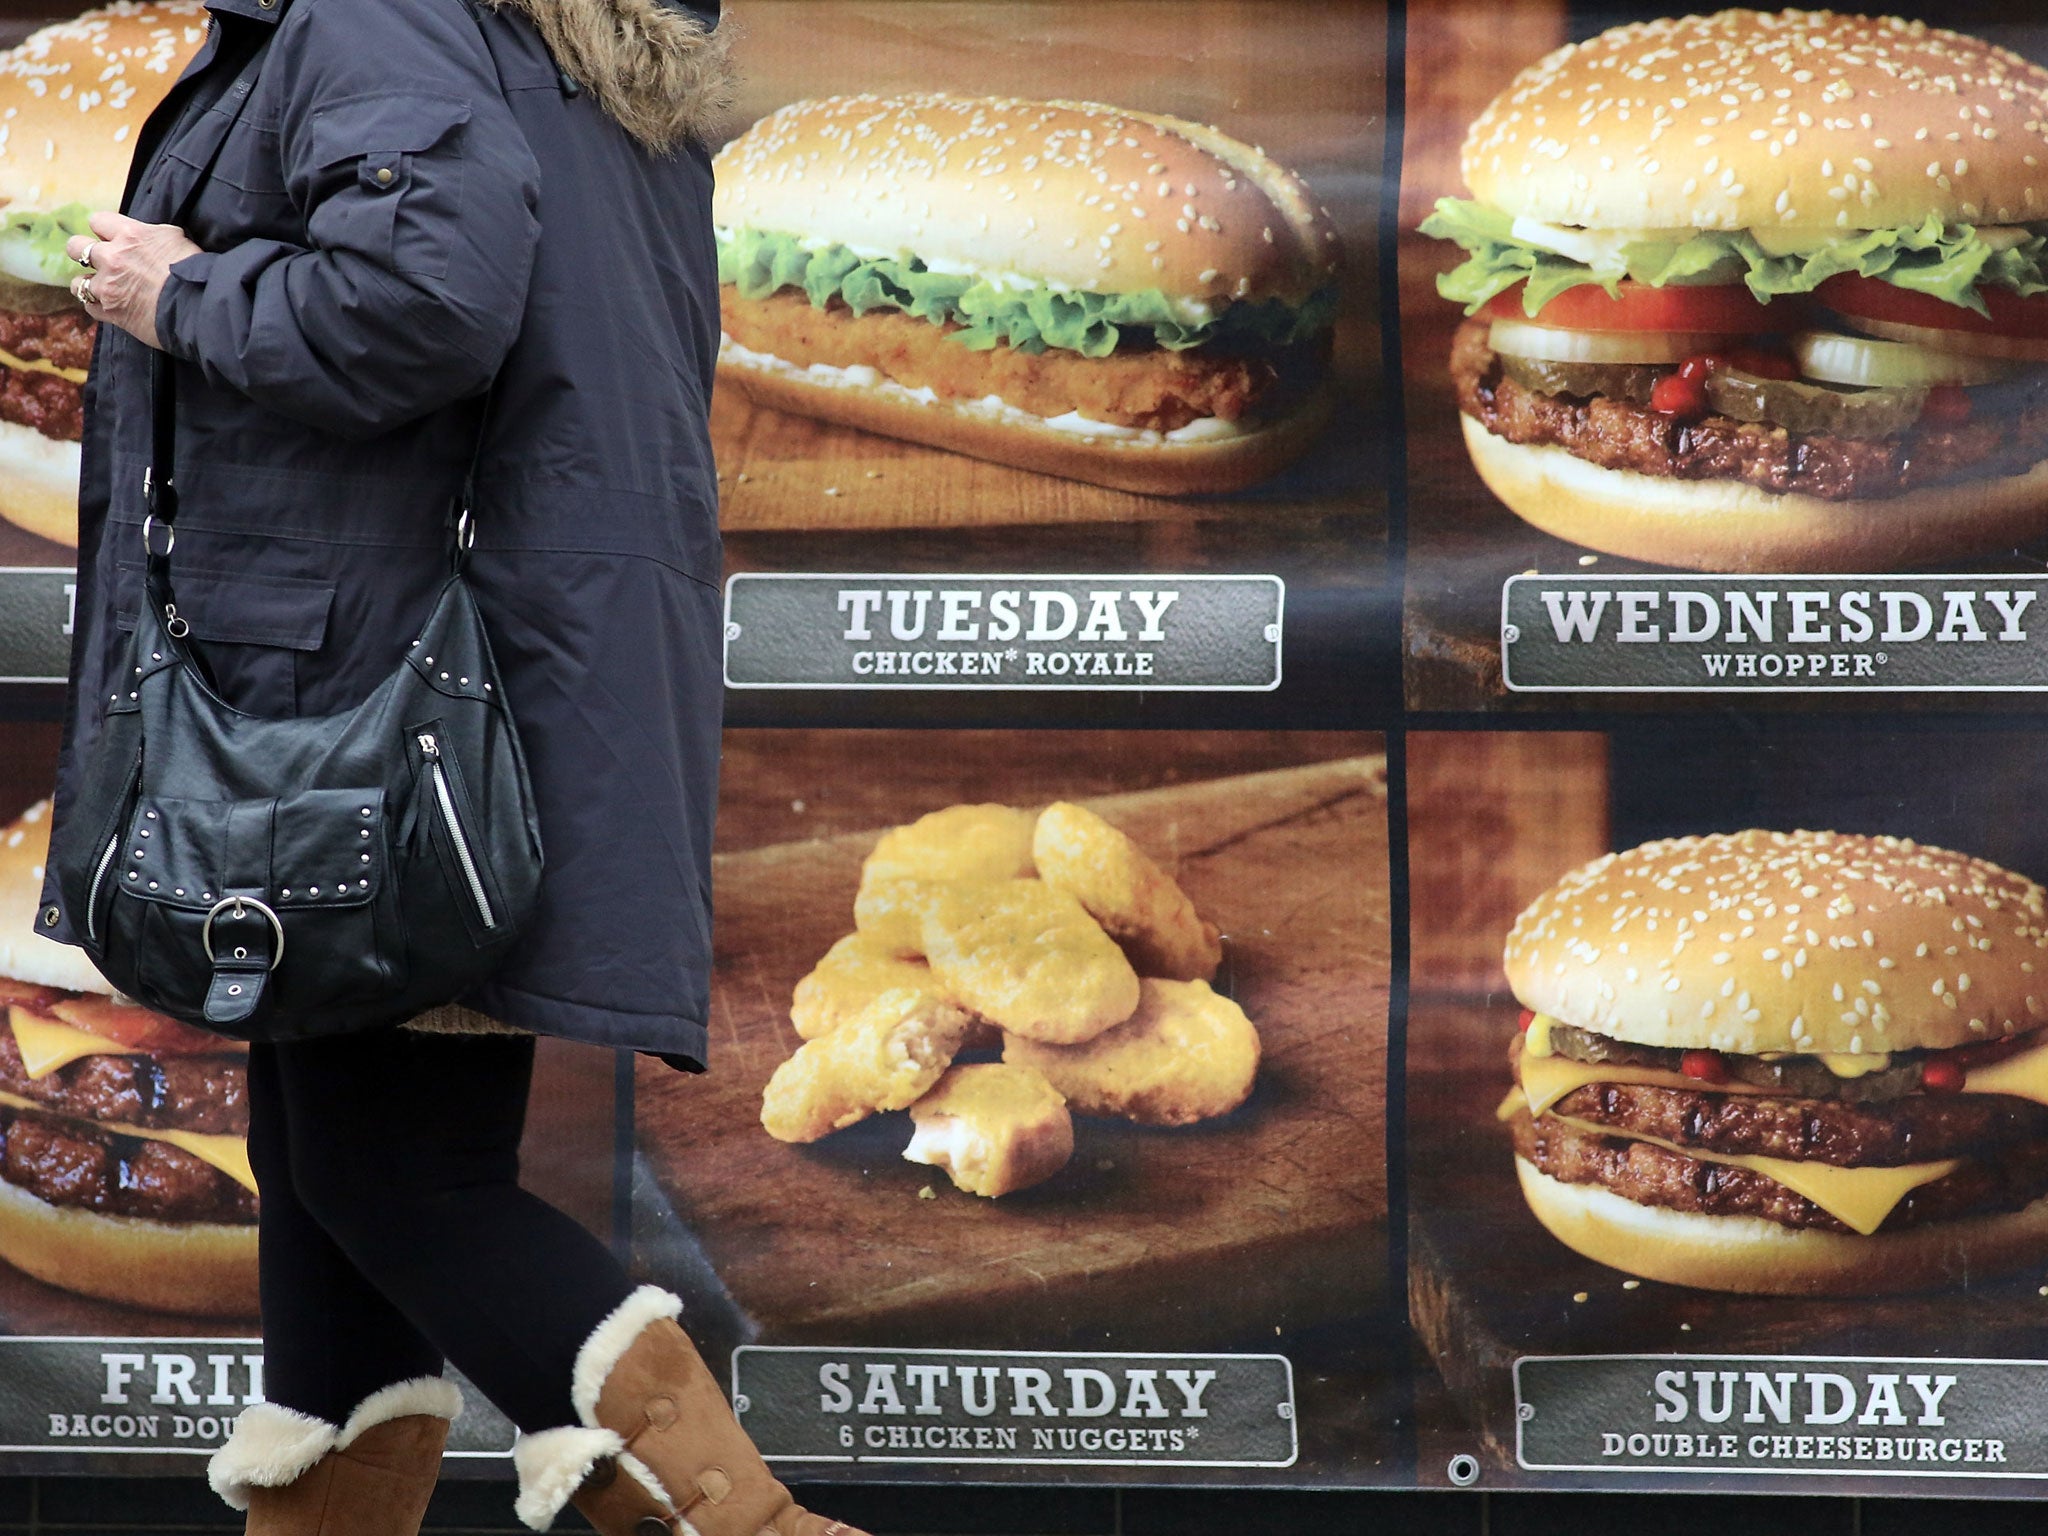 Fast-food companies should be restricted in their advertising activity, say the researchers